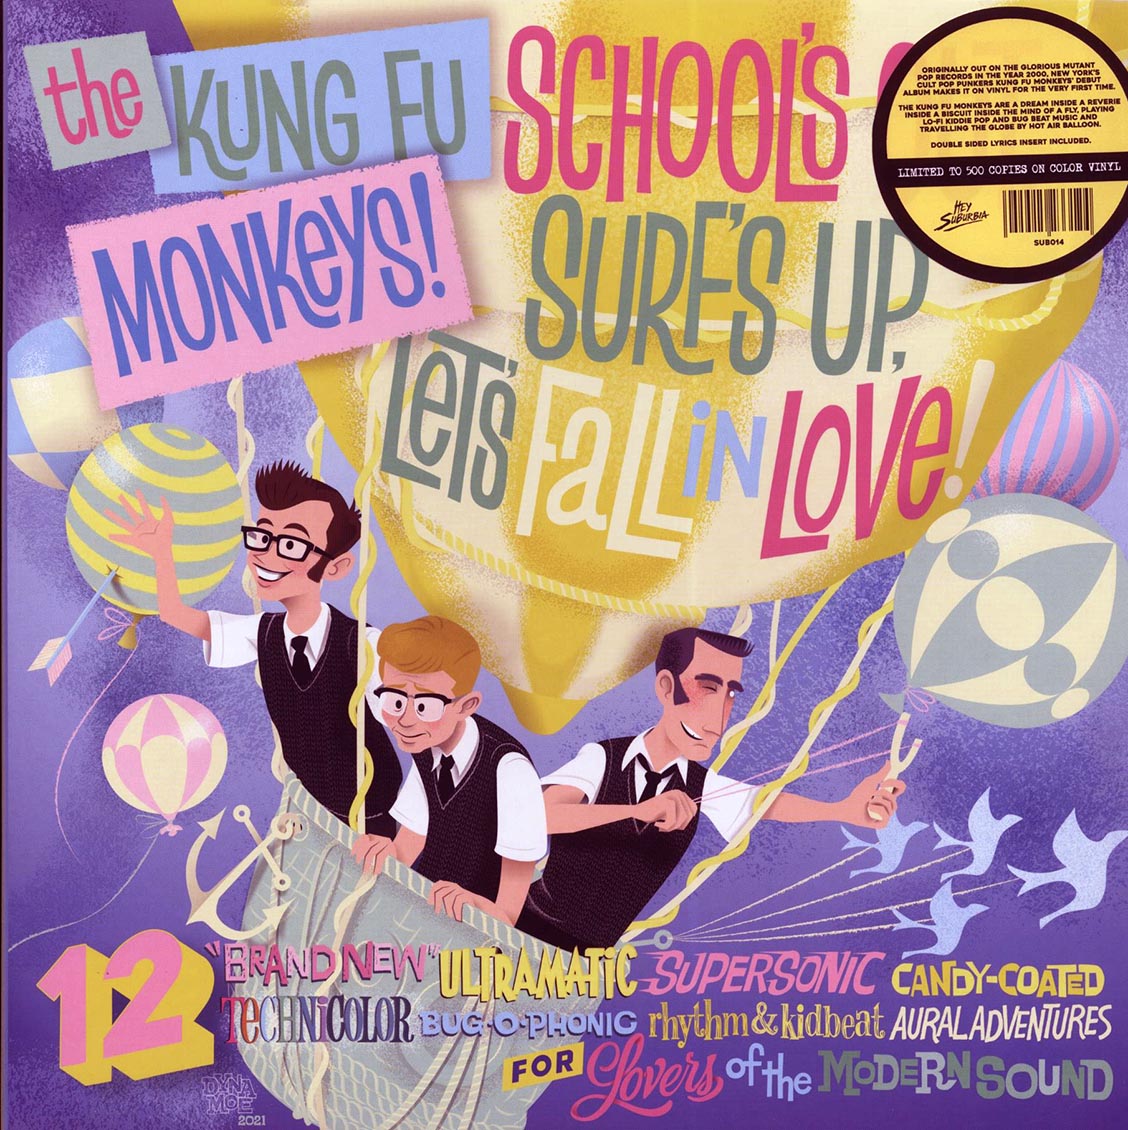 The Kung Fu Monkeys - School's Out, Surf's Up, Let's Fall In Love! (ltd. 500 copies made) (white vinyl) - Vinyl LP